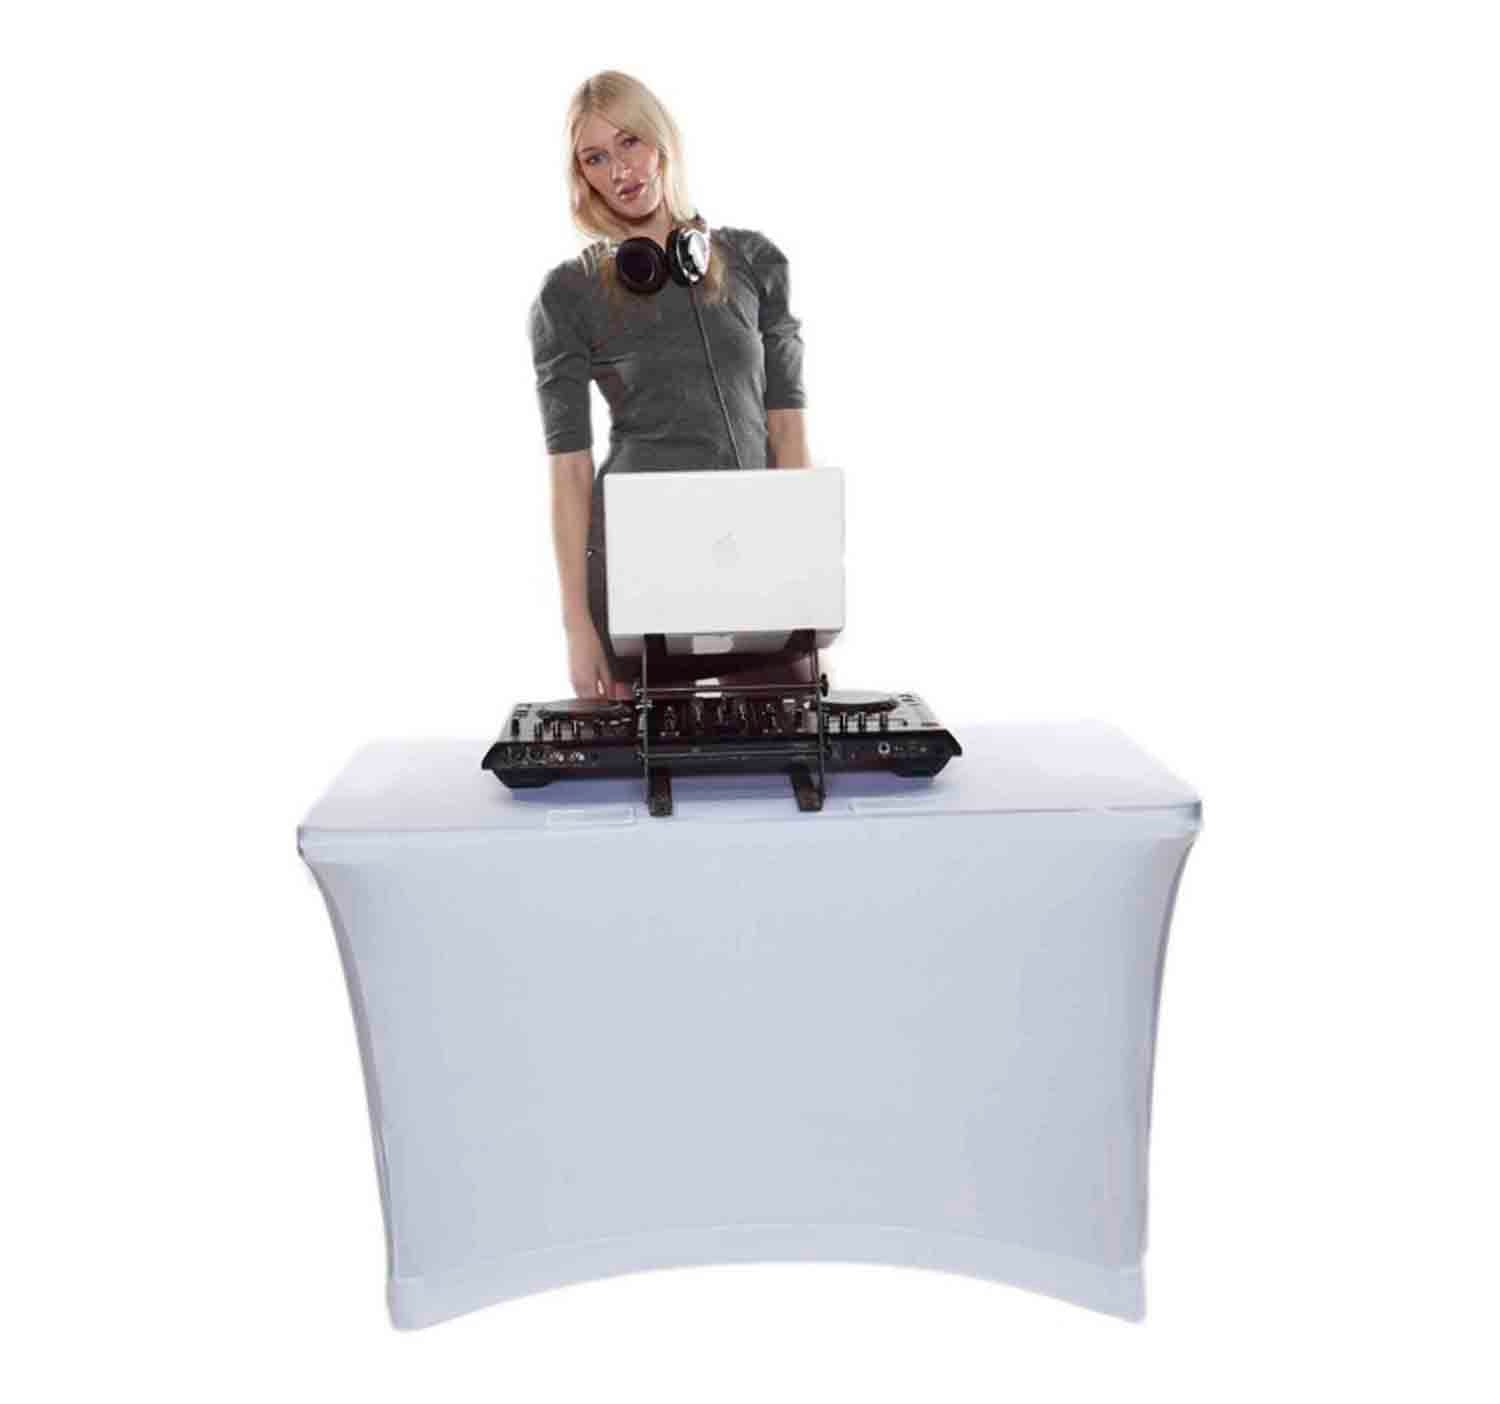 B-Stock: REPLACEMENT SCRIM Scrim King SS-TBL 402-W White 4' Table Scrim with Closed Back - Hollywood DJ